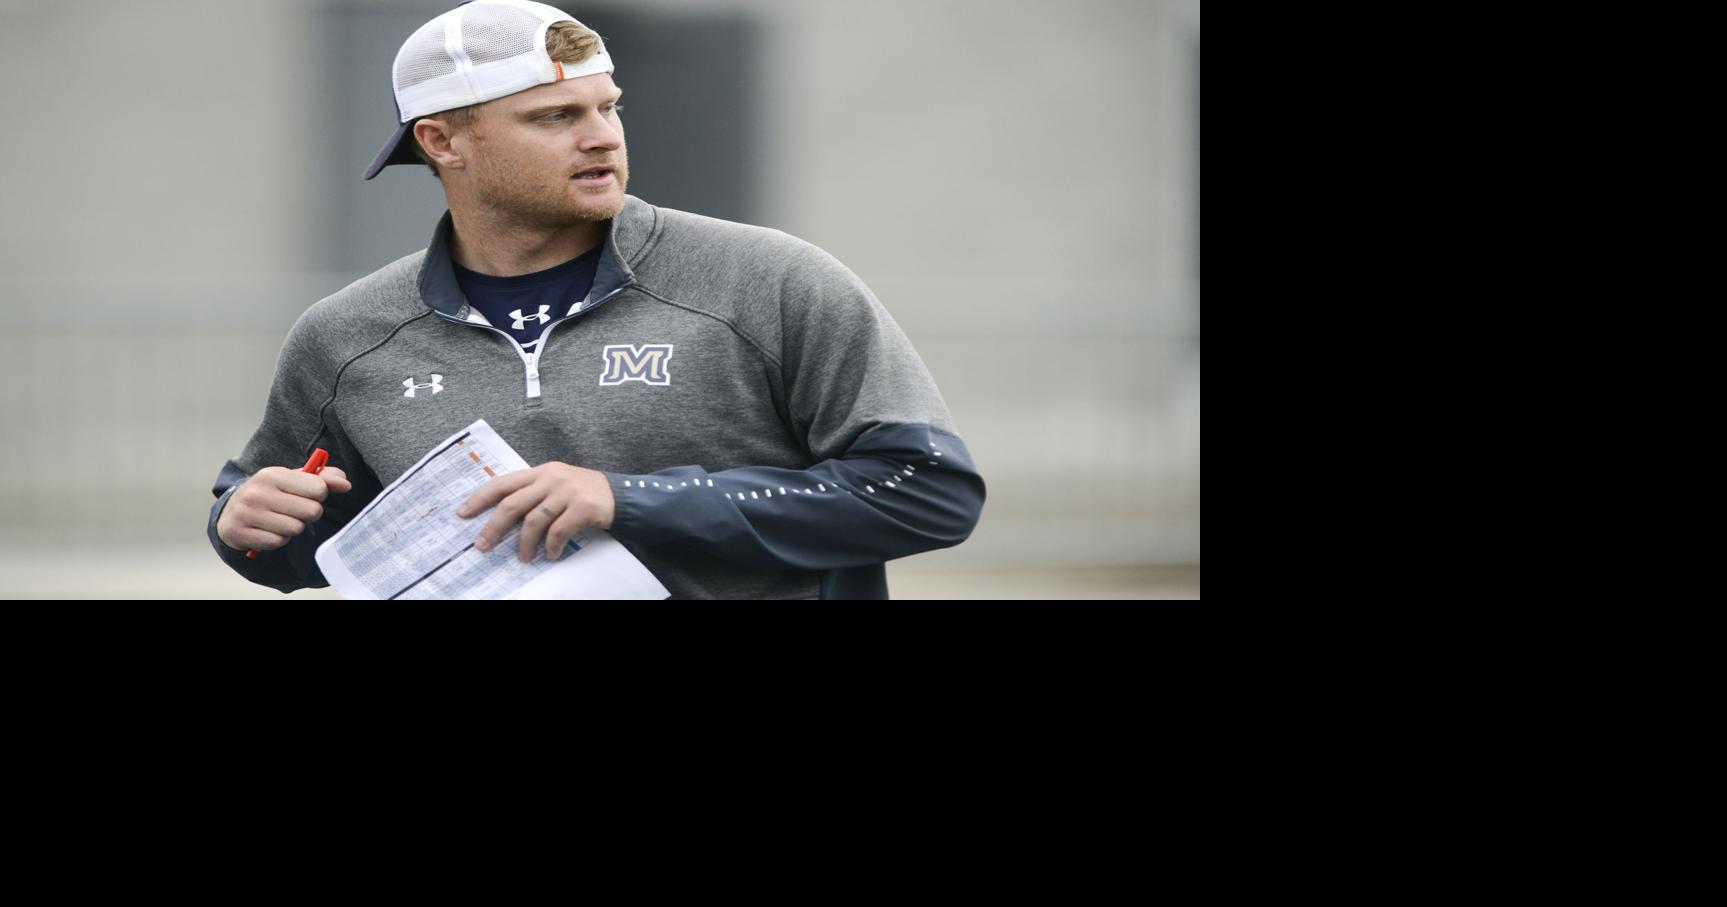 After uneven debut, Montana State OC Taylor Housewright is equipped for strong season